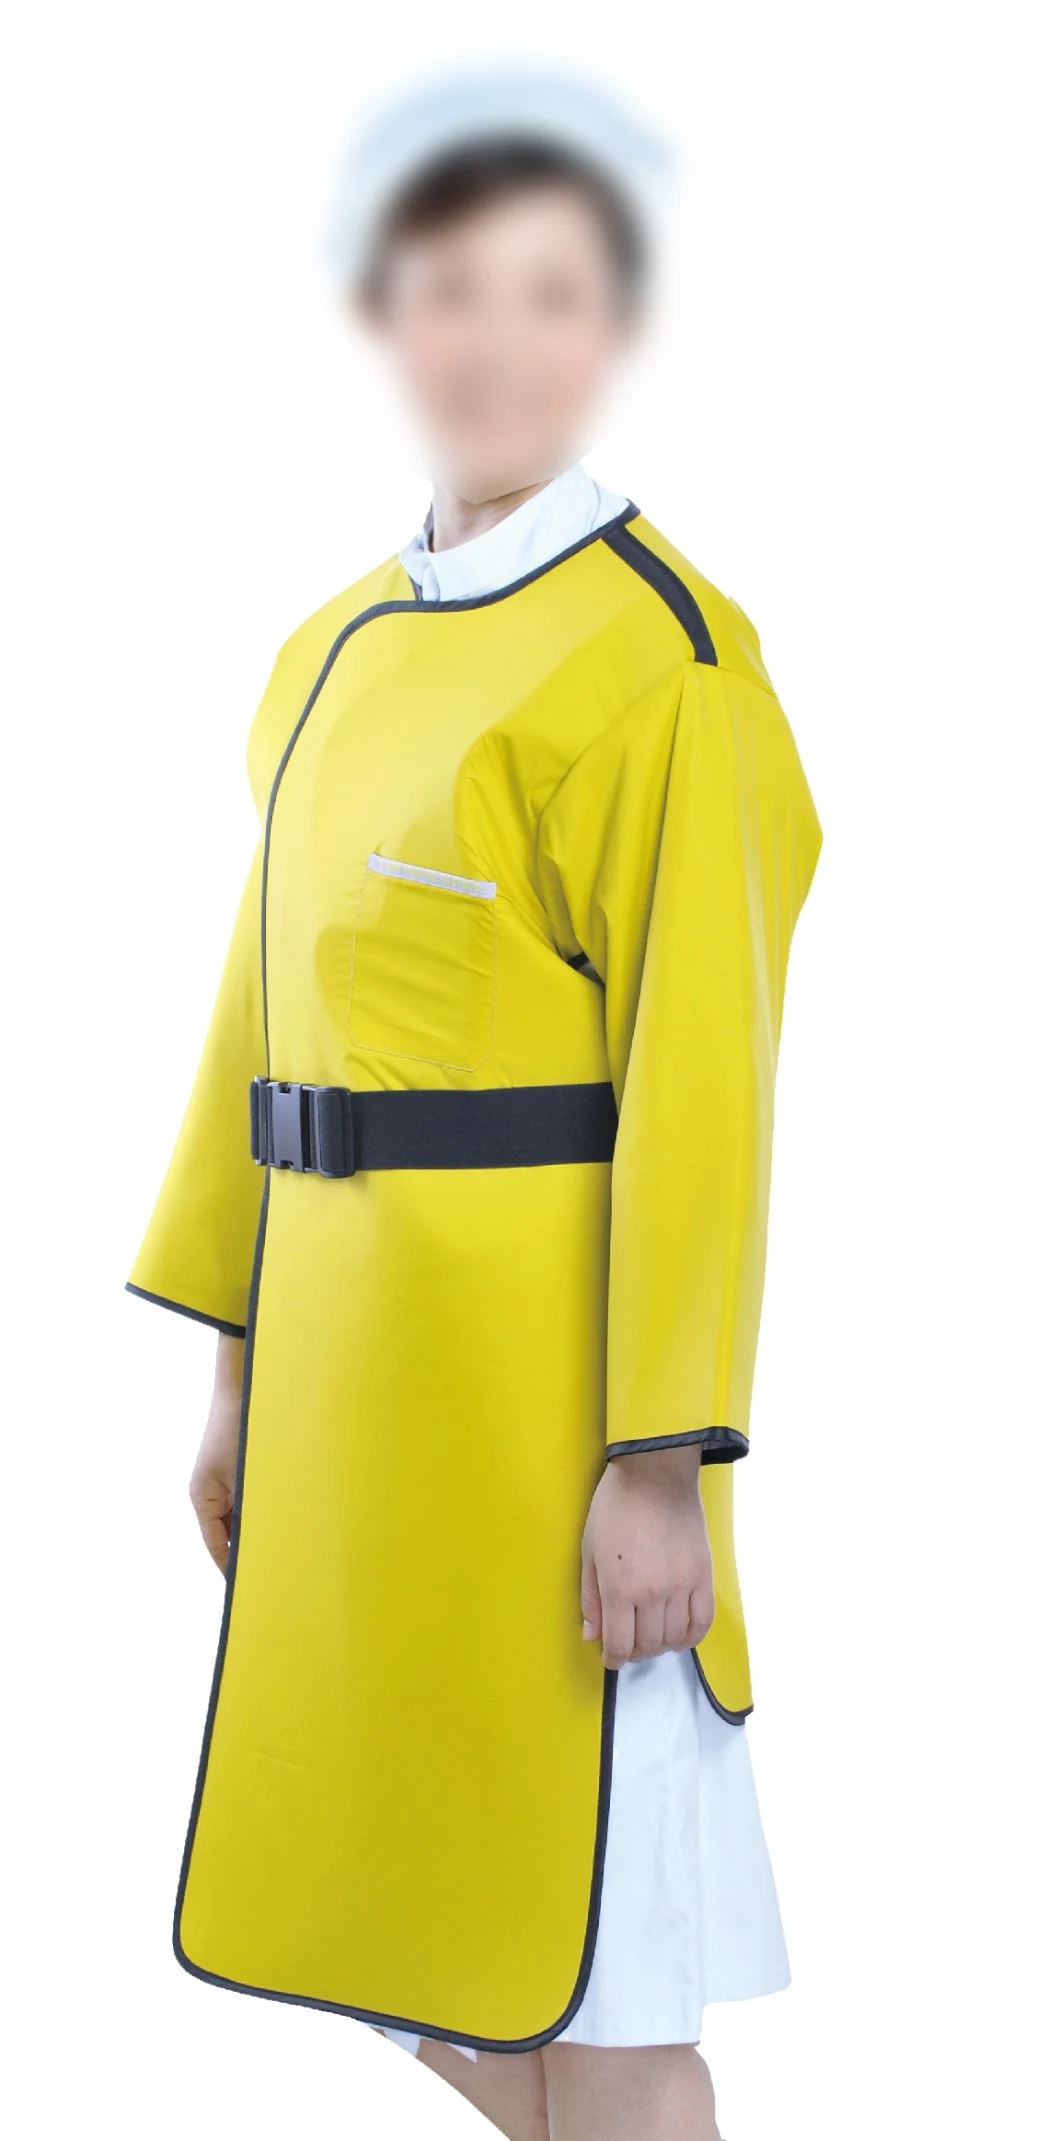 X-ray Lead Protective Radiation Apron 1074309 Double Side Apron